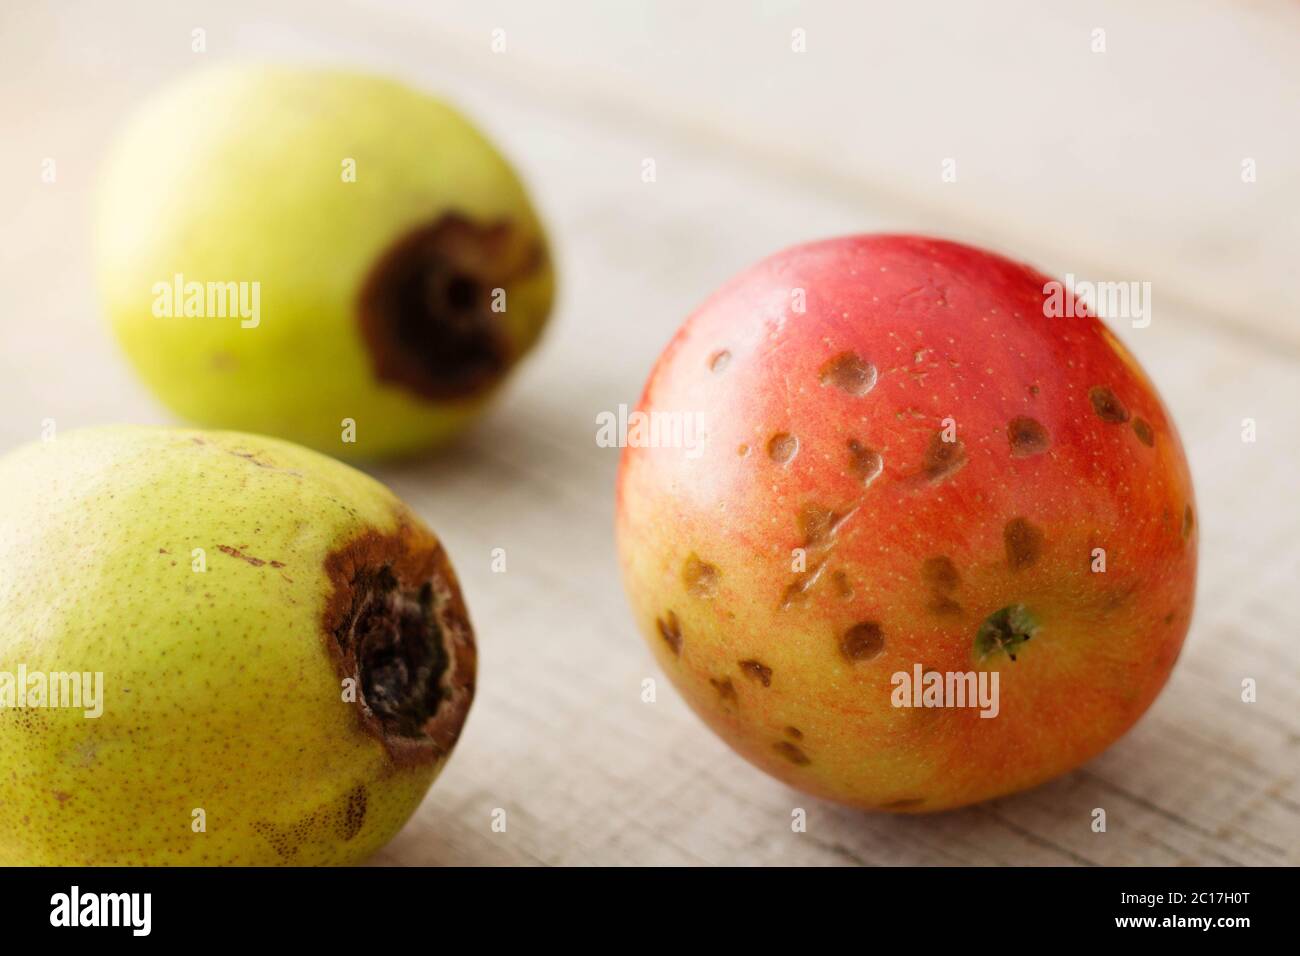 Apples with dark spots are going to rot. Stock Photo